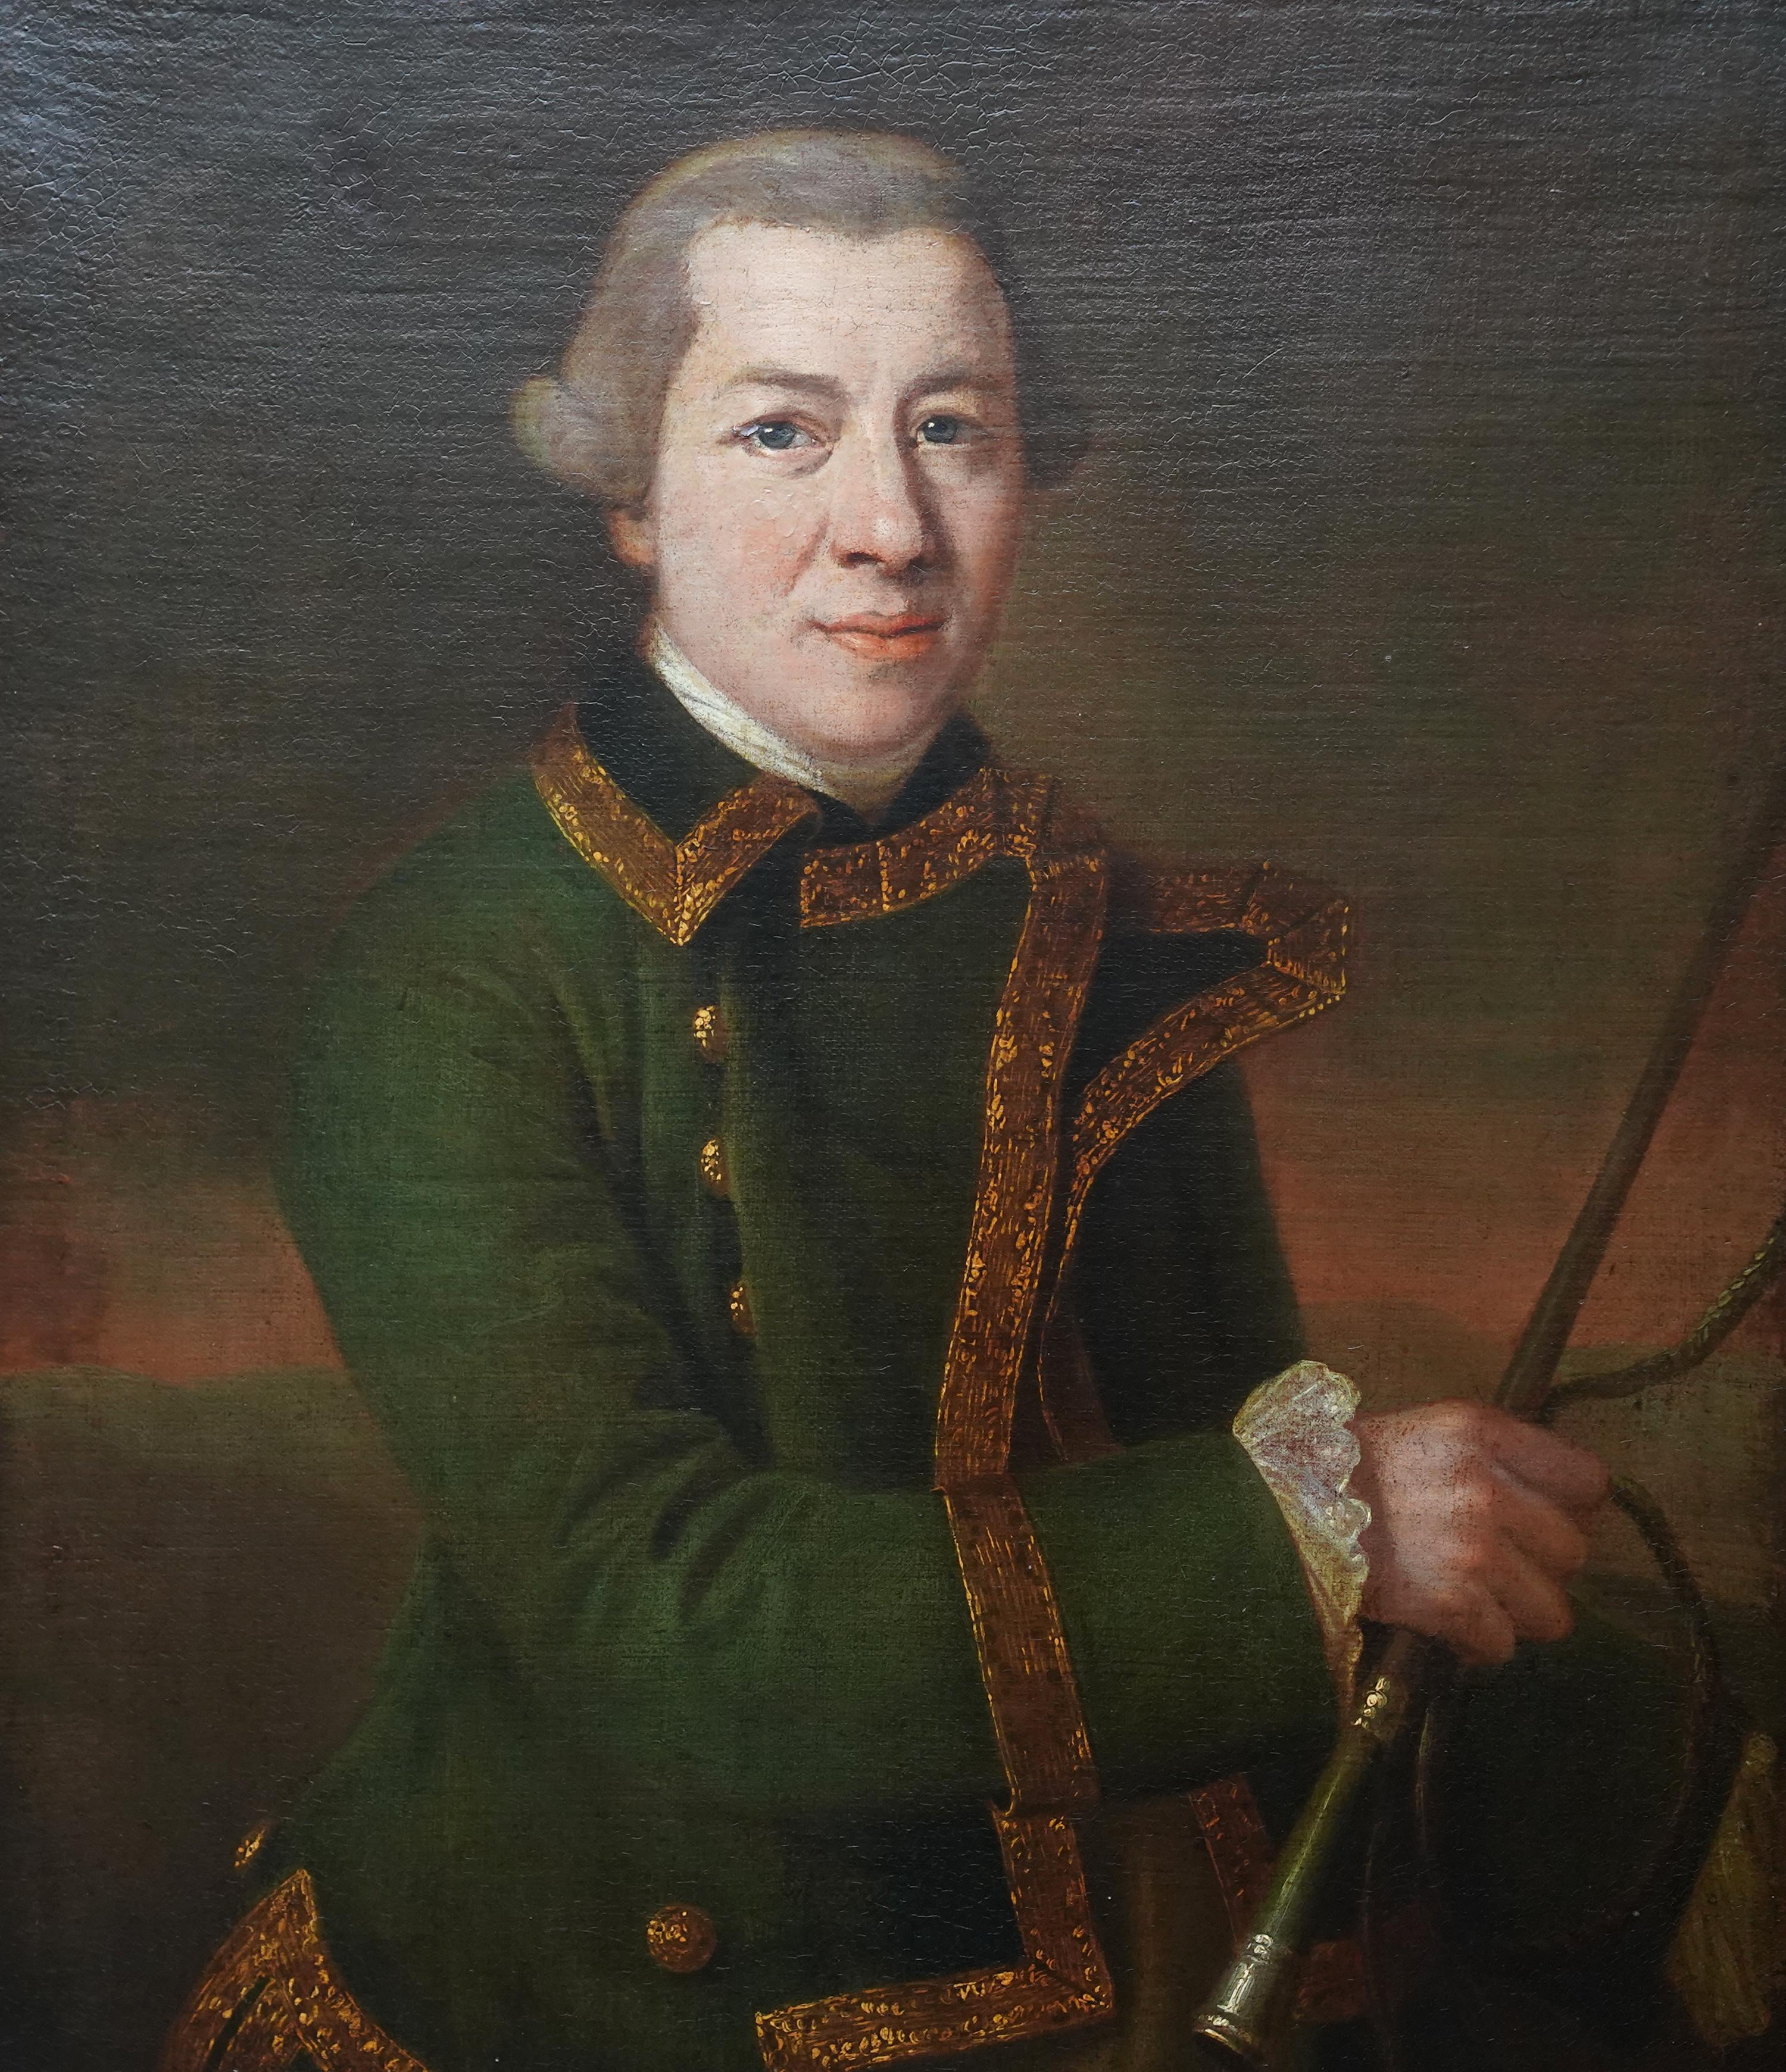 Portrait of a Gentleman in Green Coat -British 18thC art Old Master oil painting For Sale 5